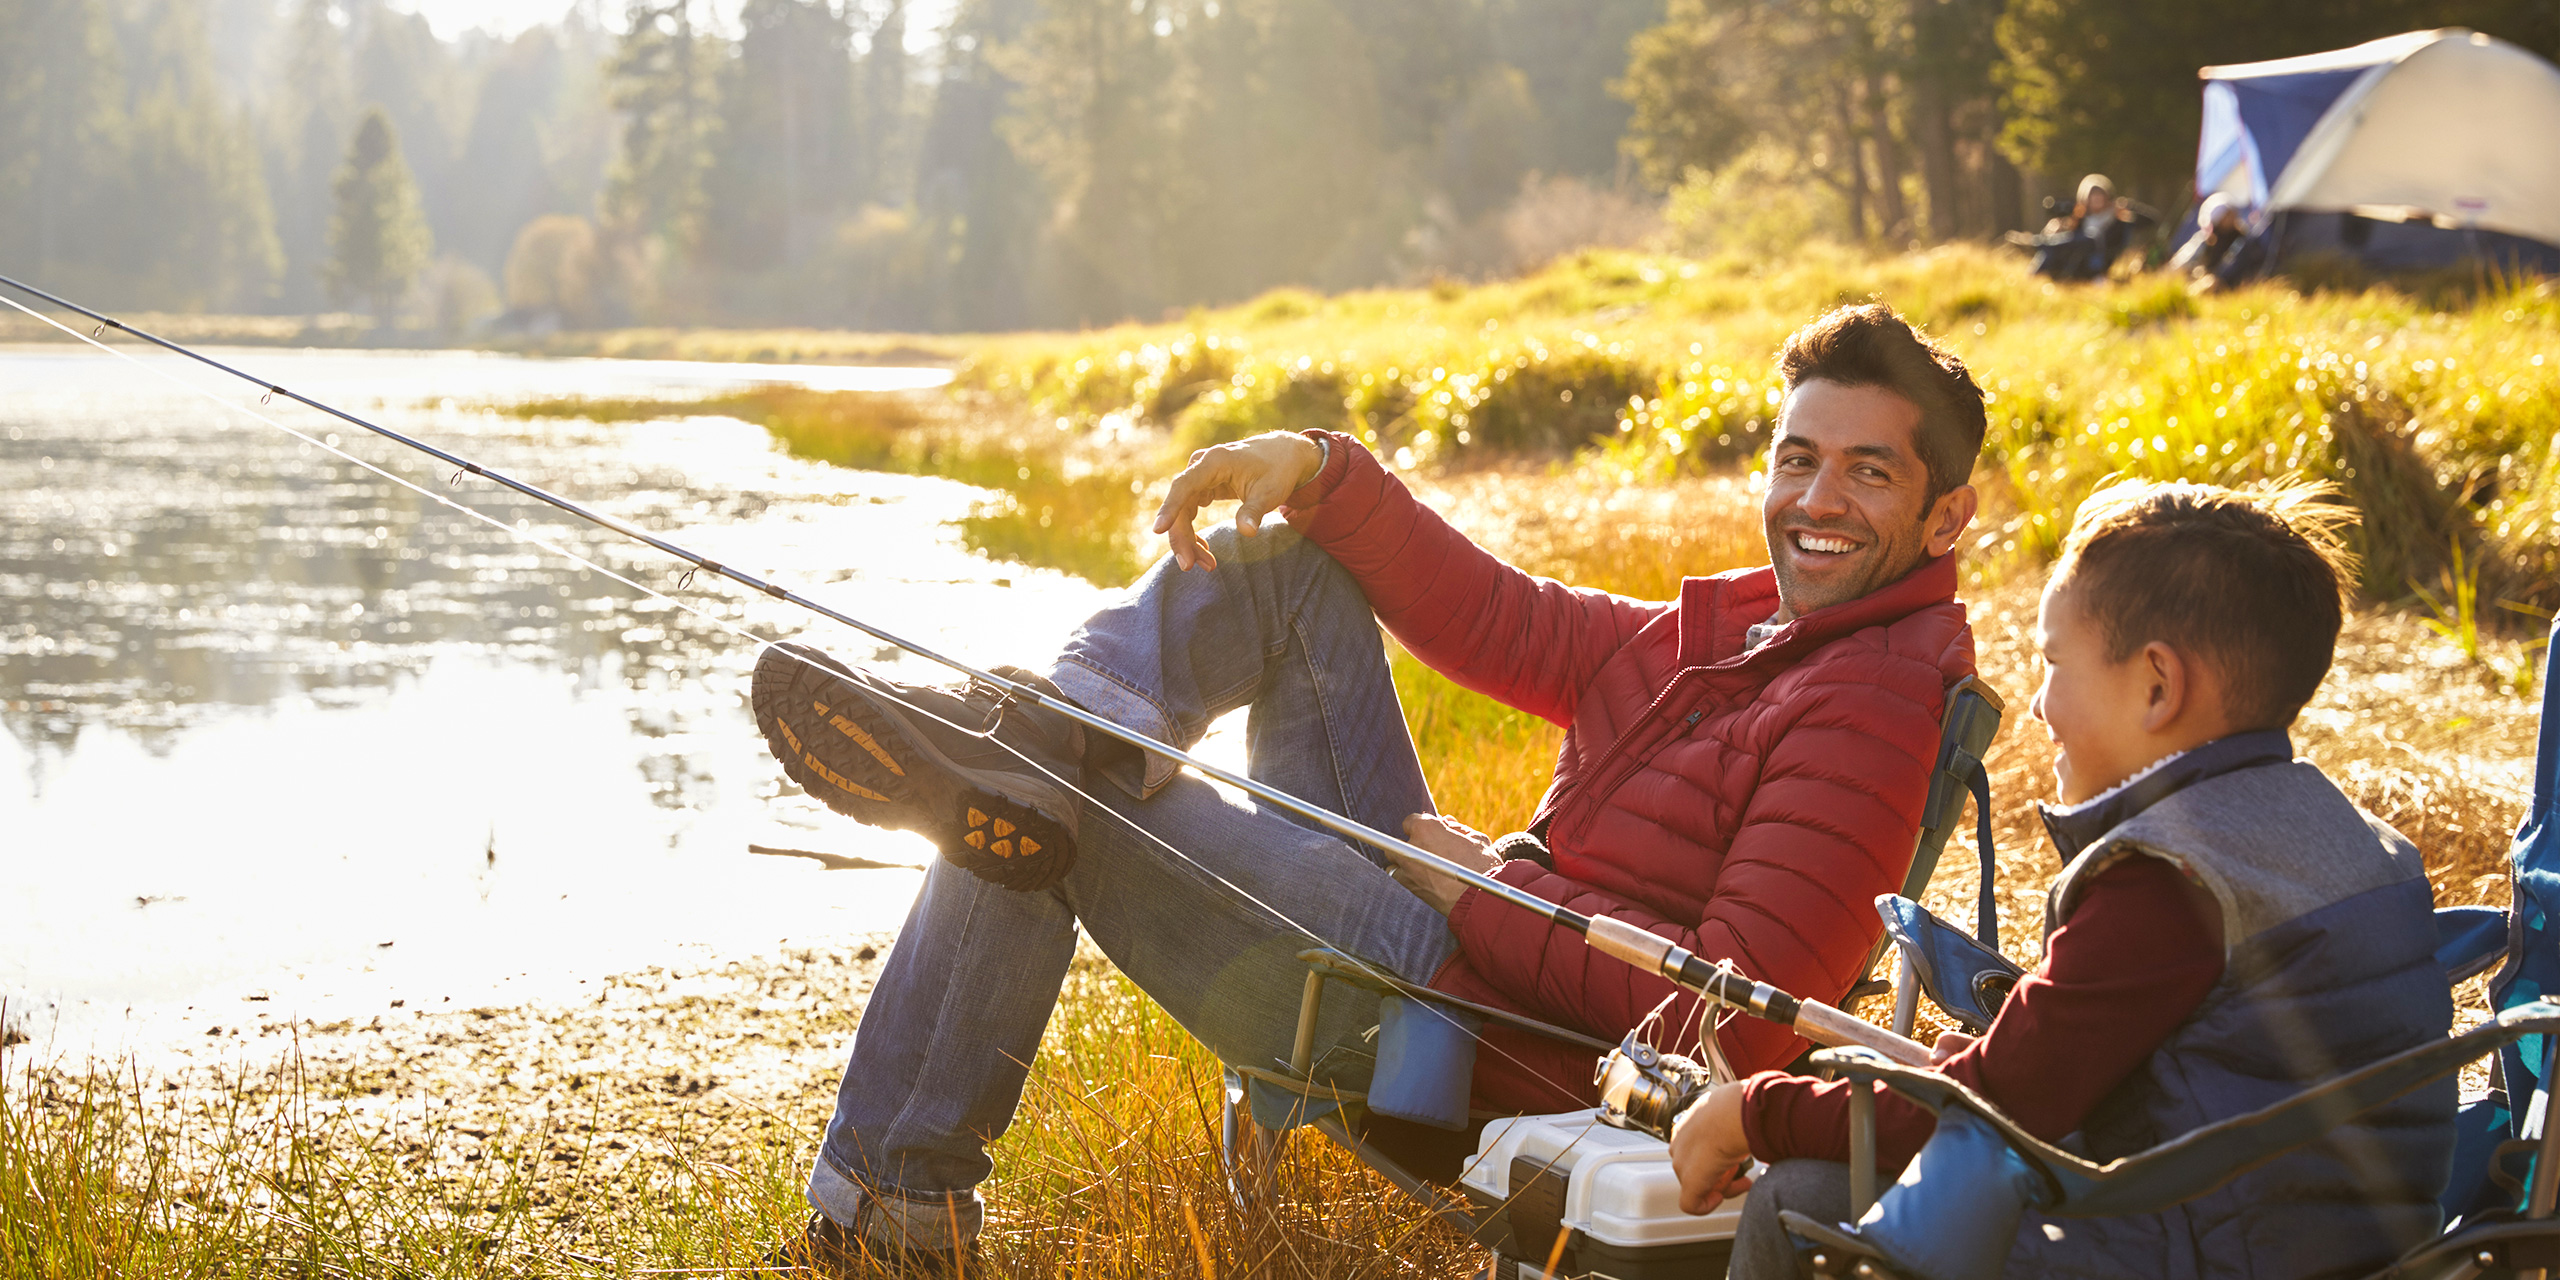 dad sitting with son camping by lake wearing jacket; Courtesy Monkey Business Images/Shutterstock